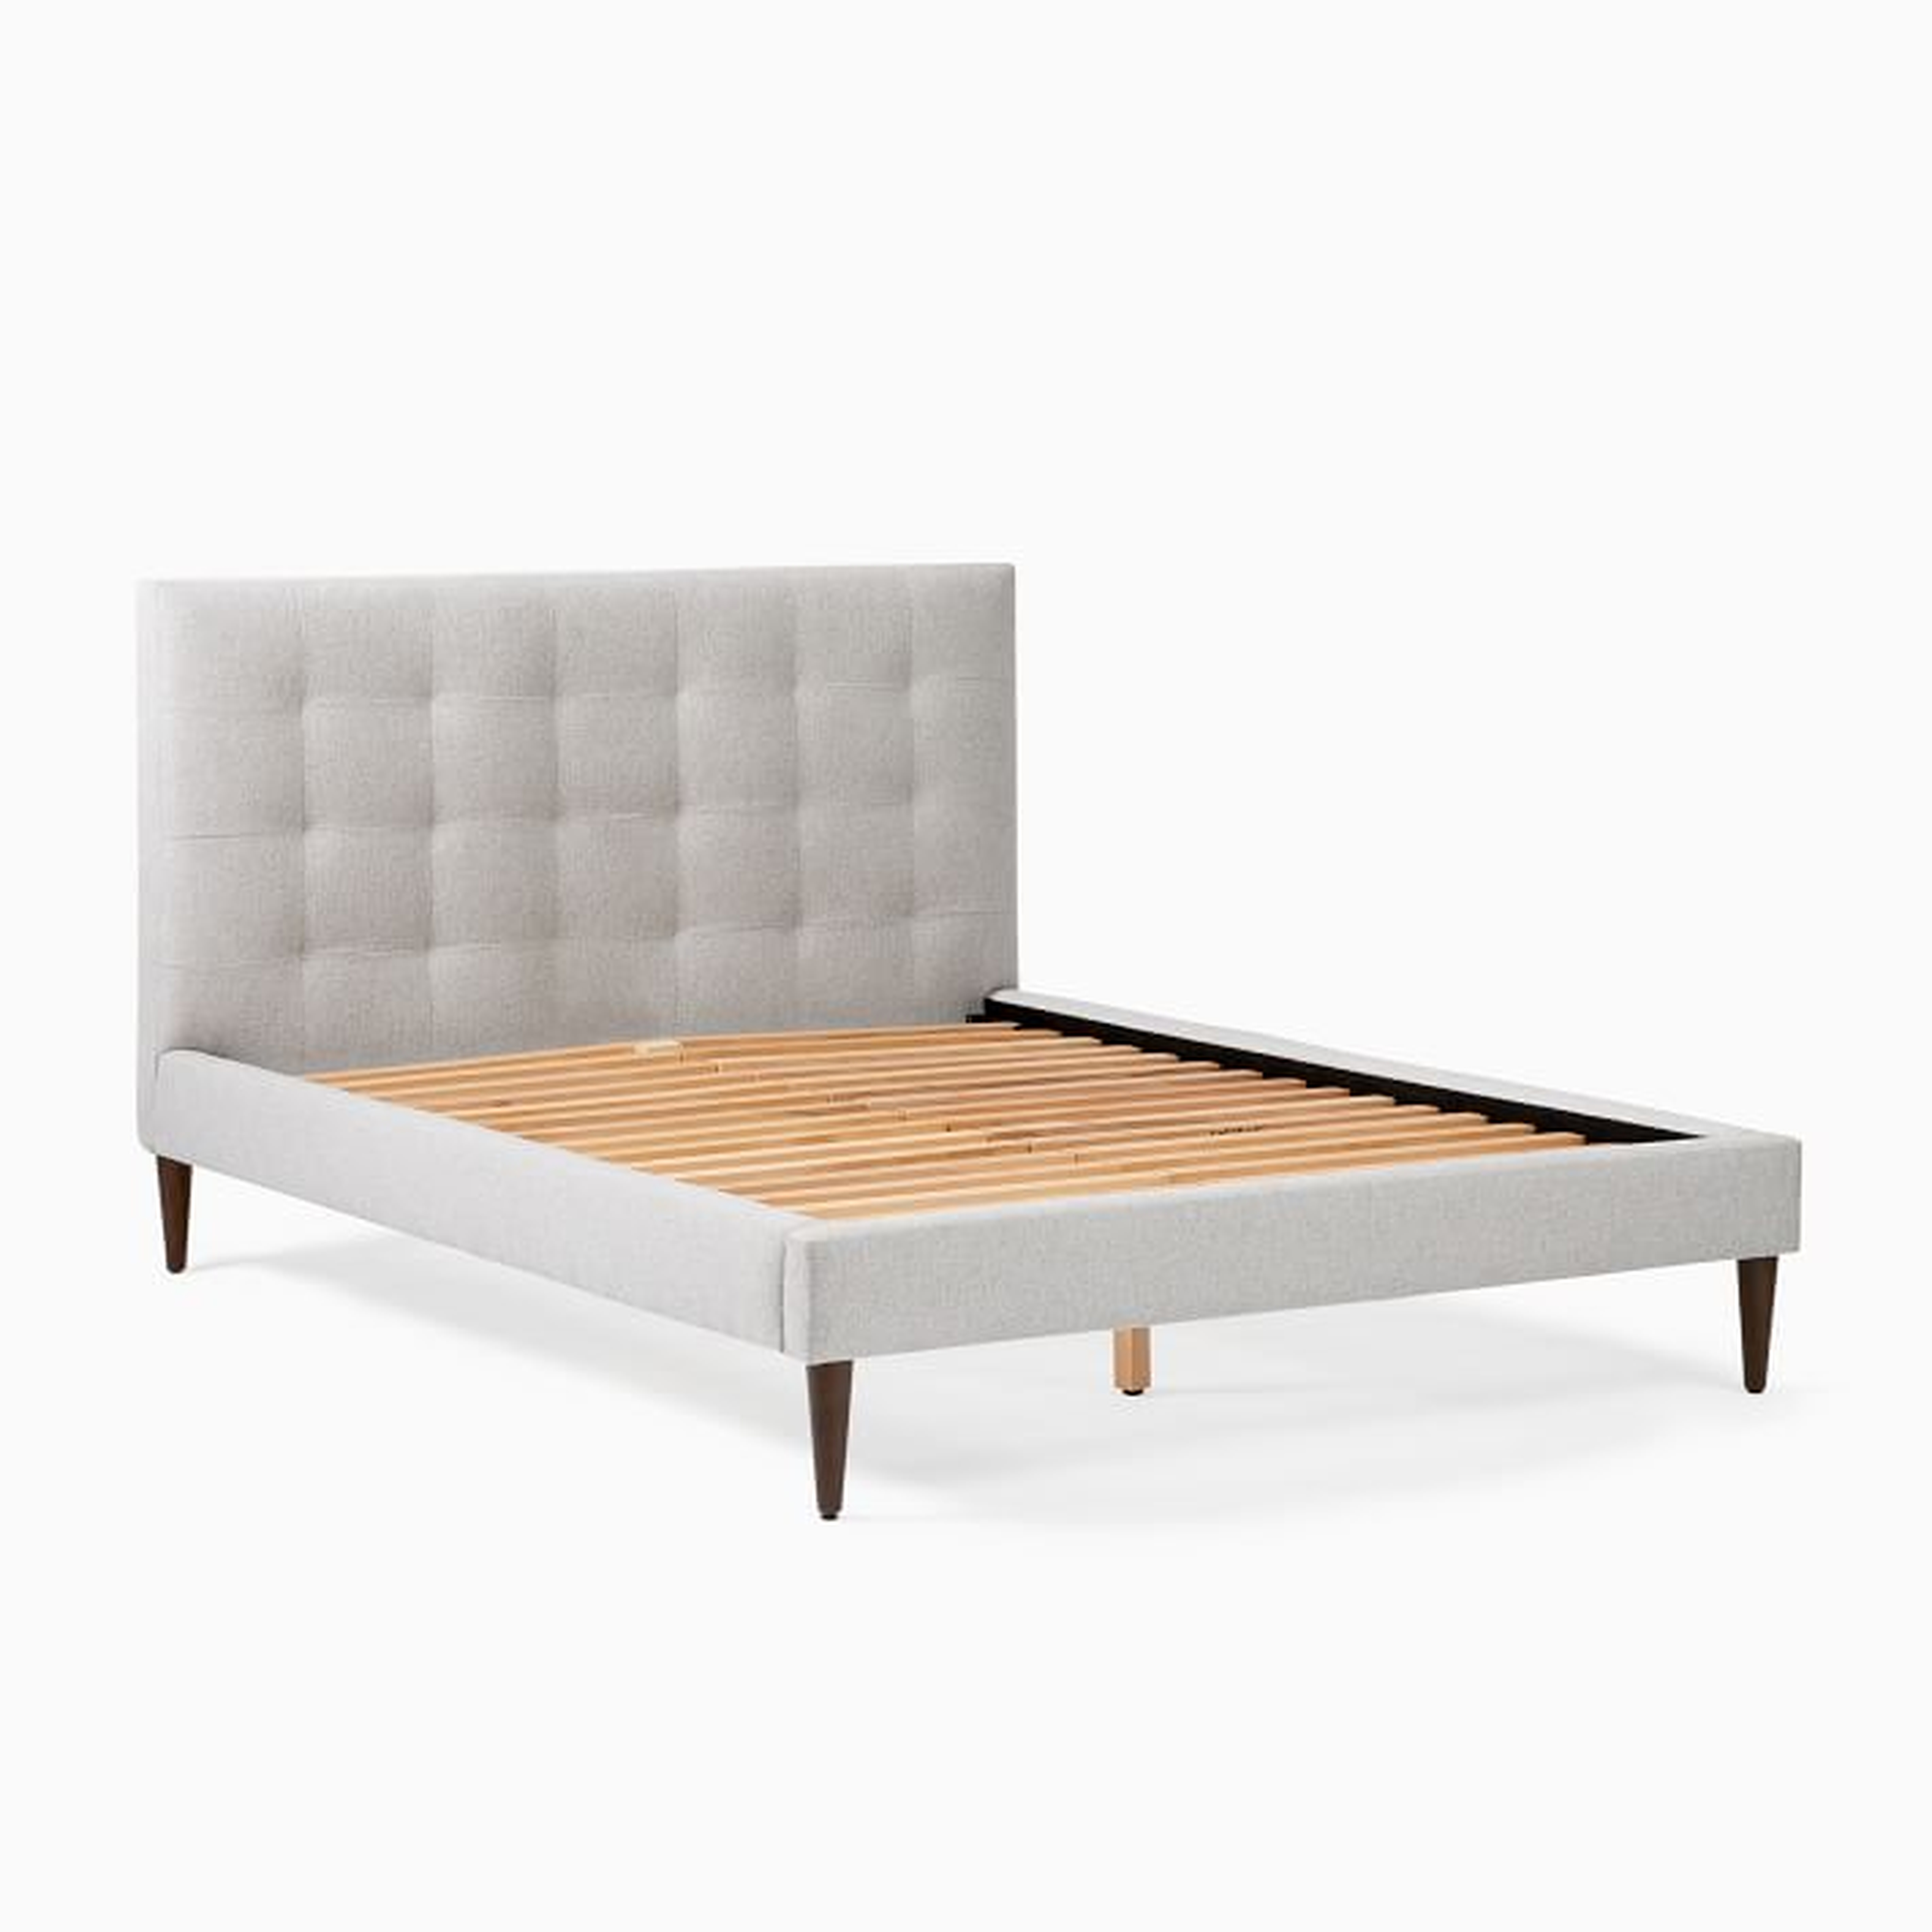 Grid Tufted Tall Bed, Queen, Chenille Tweed, Frost Gray, Pecan - West Elm